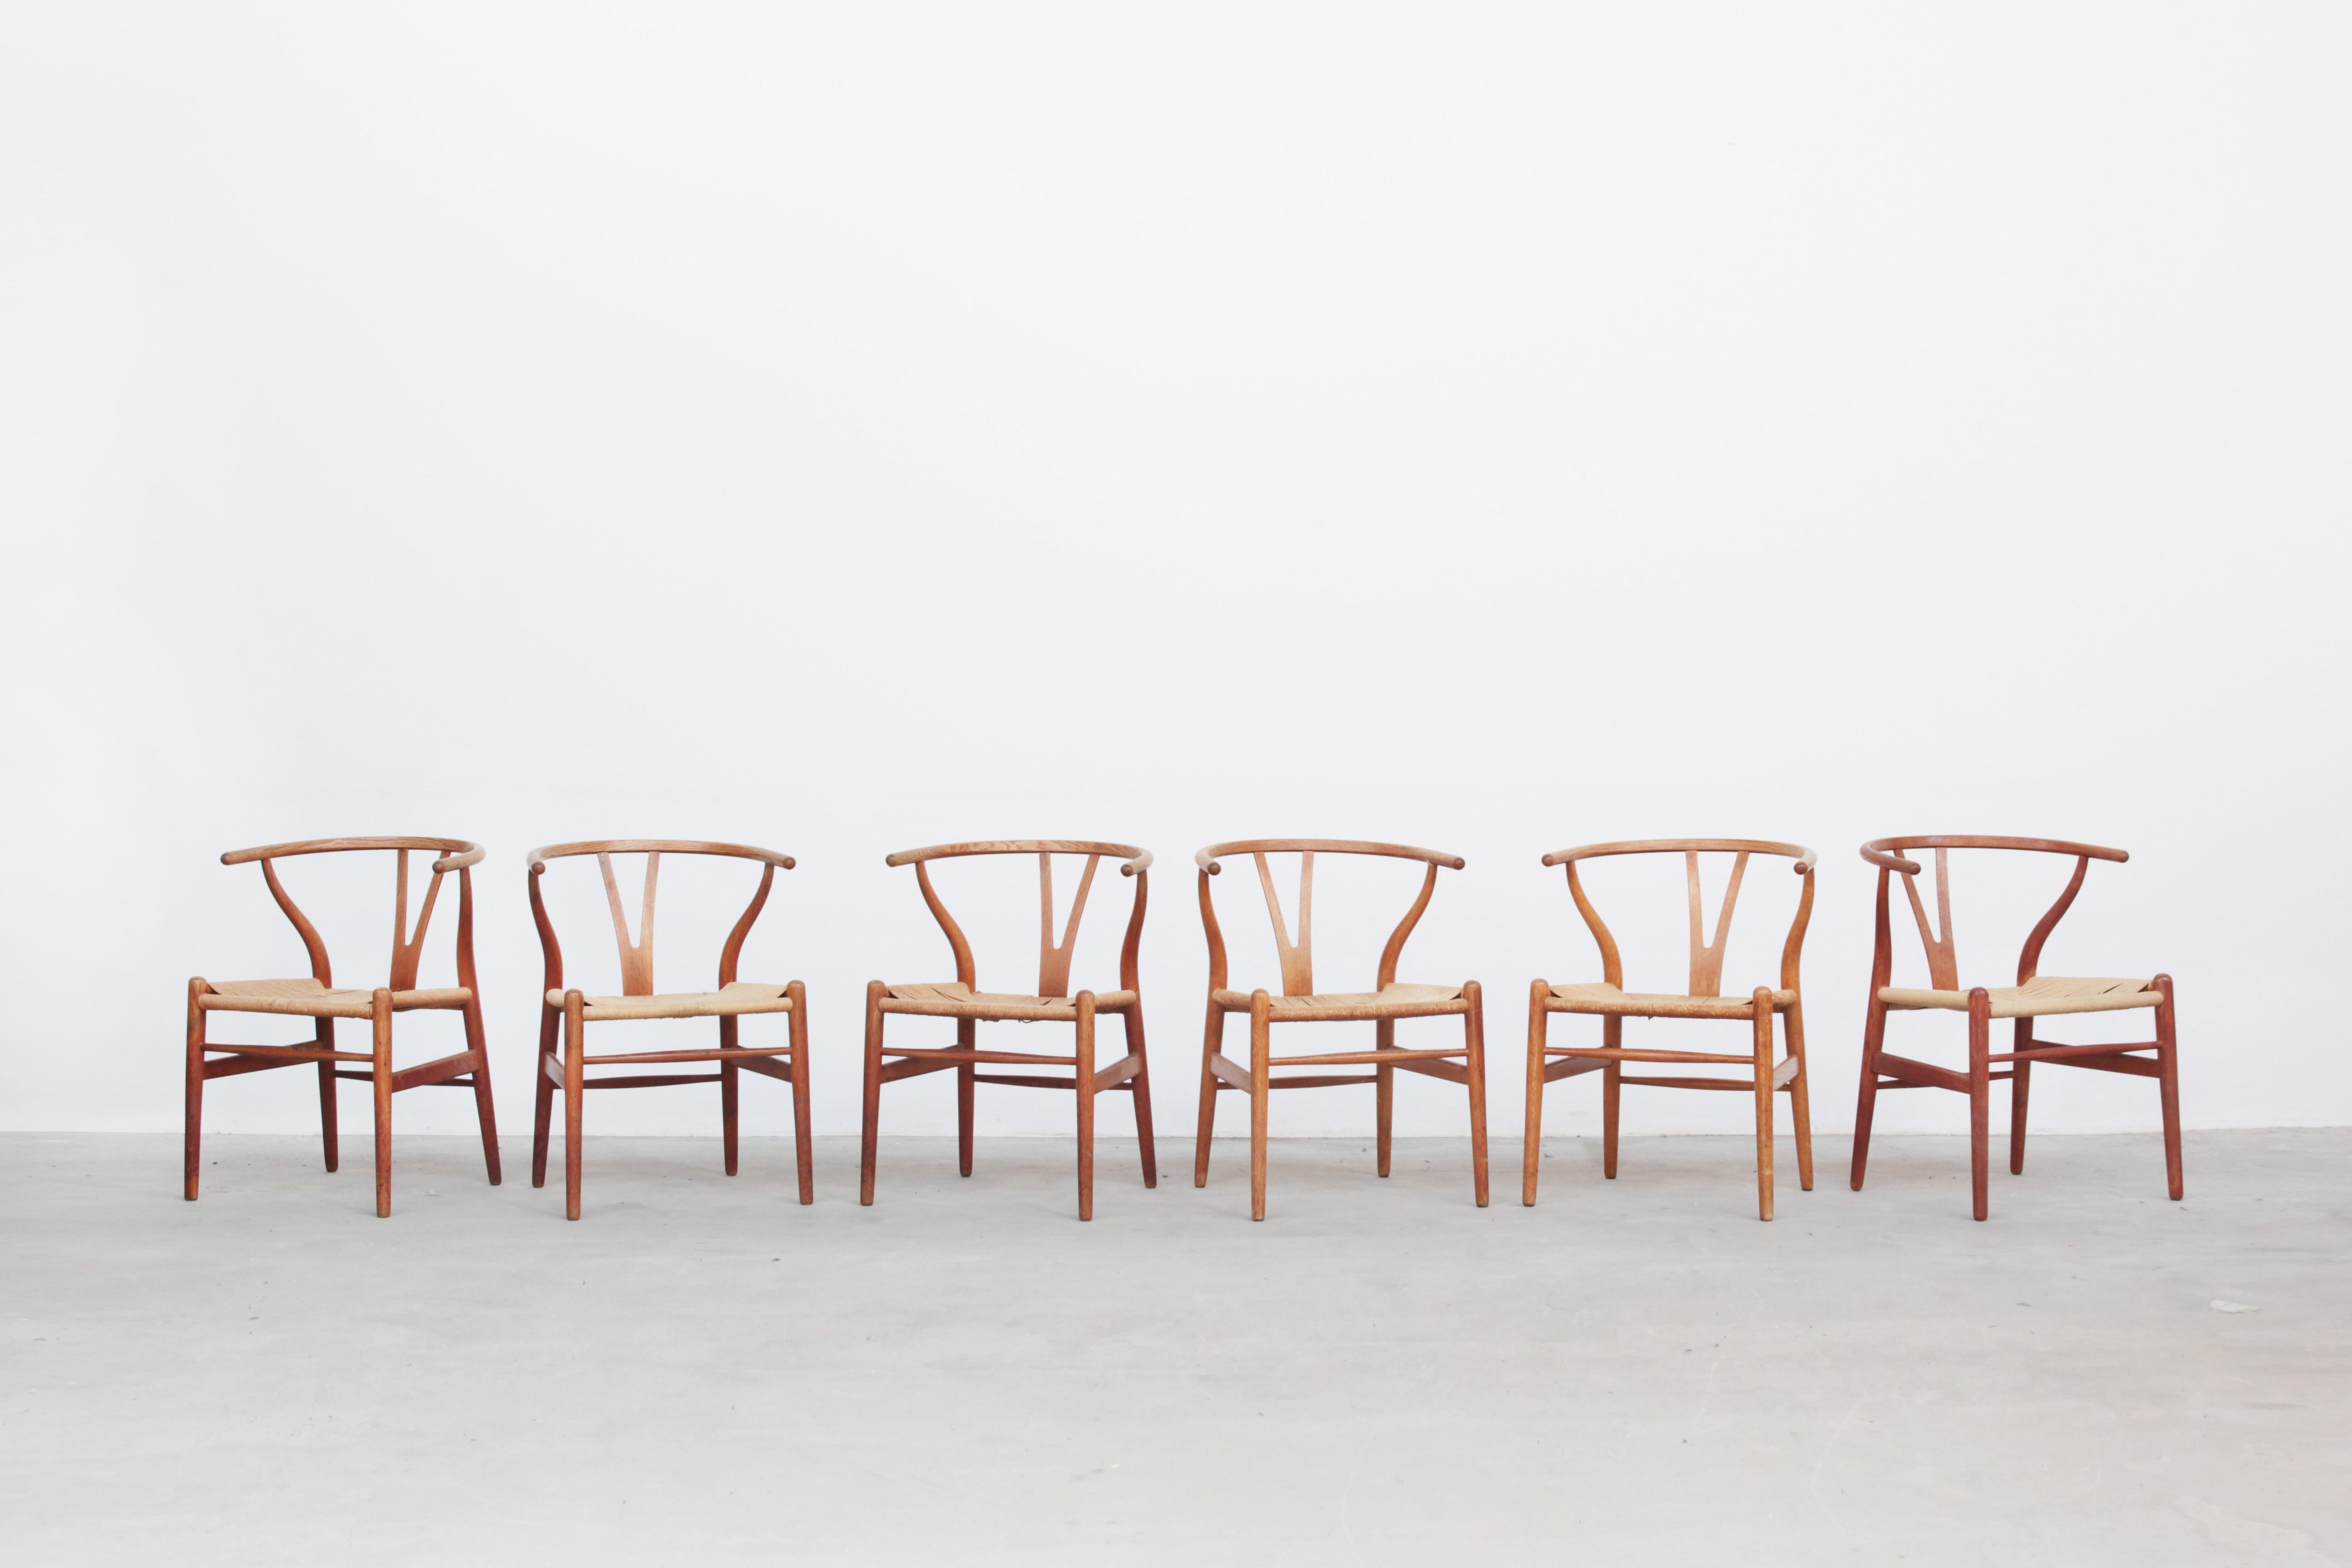 A set of six beautiful and original wishbone chairs designed by Hans J. Wegner and produced by Carl Hansen in the 1960s in Denmark. All chairs are made out of oak and in a beautiful original condition with signs of usage like little stains, dirt and